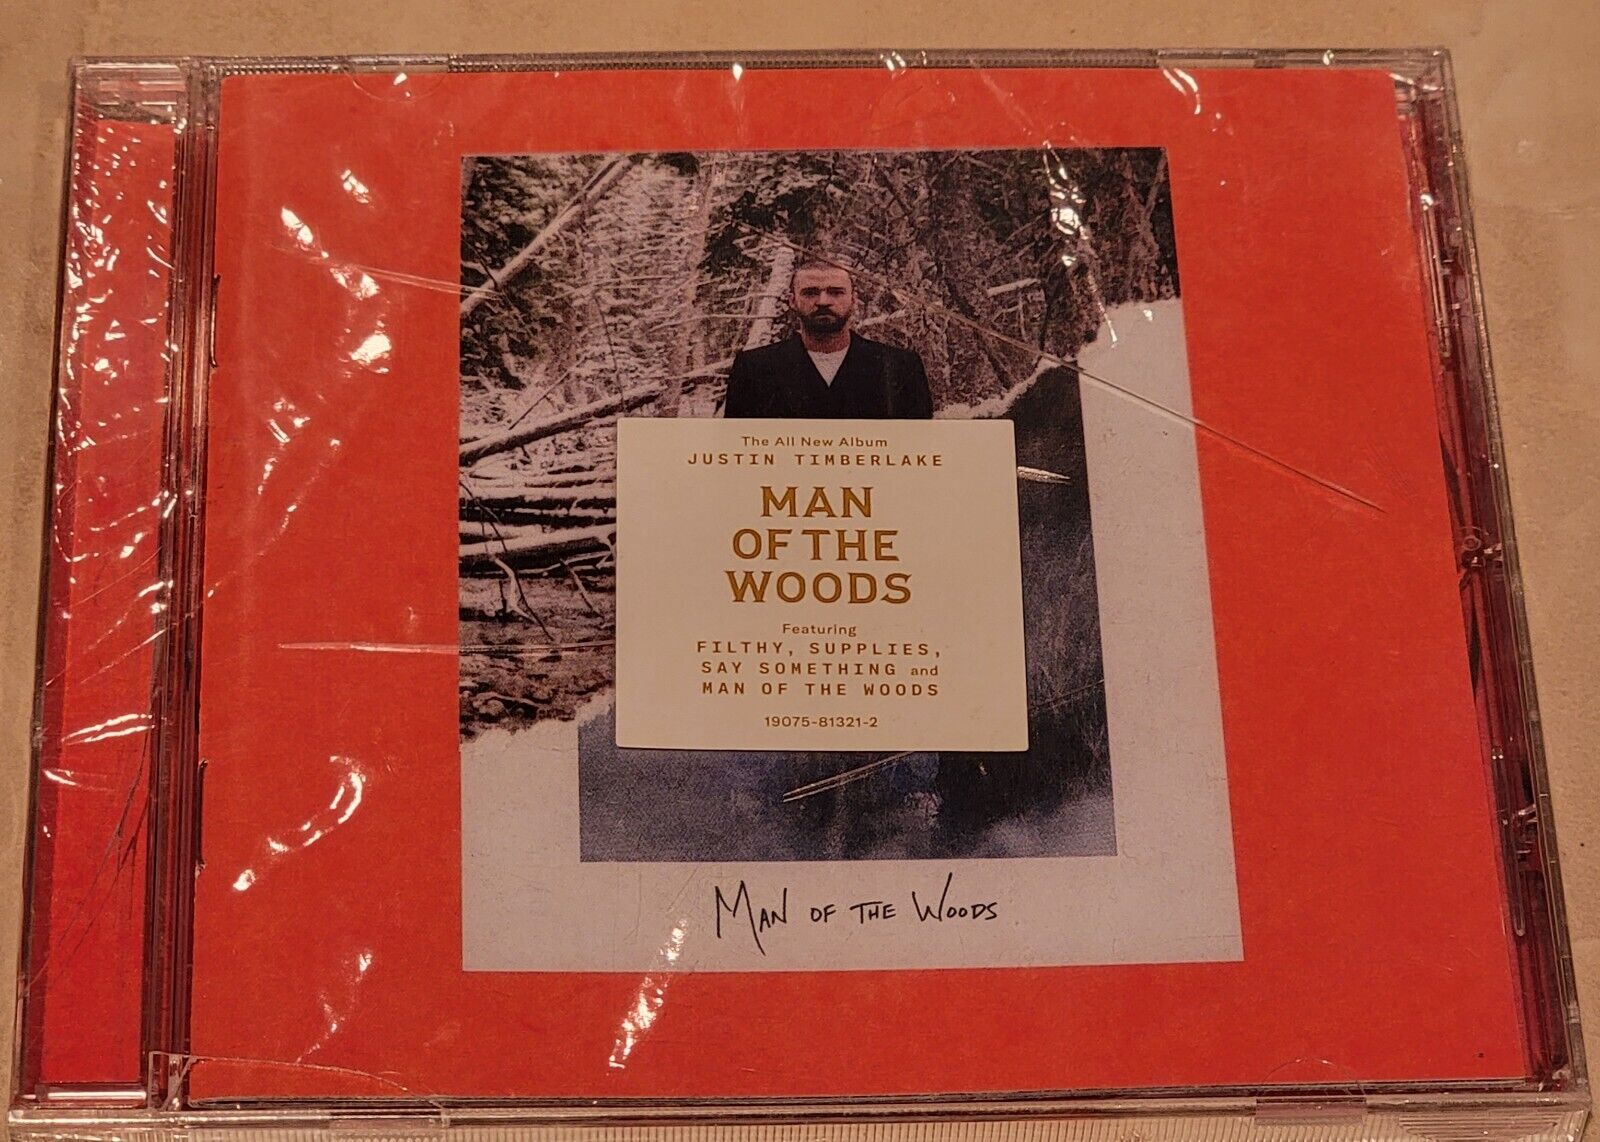 NEW! JUSTIN TIMBERLAKE  MAN OF THE WOODS CD Sealed 2018 RCA Records "Filthy"